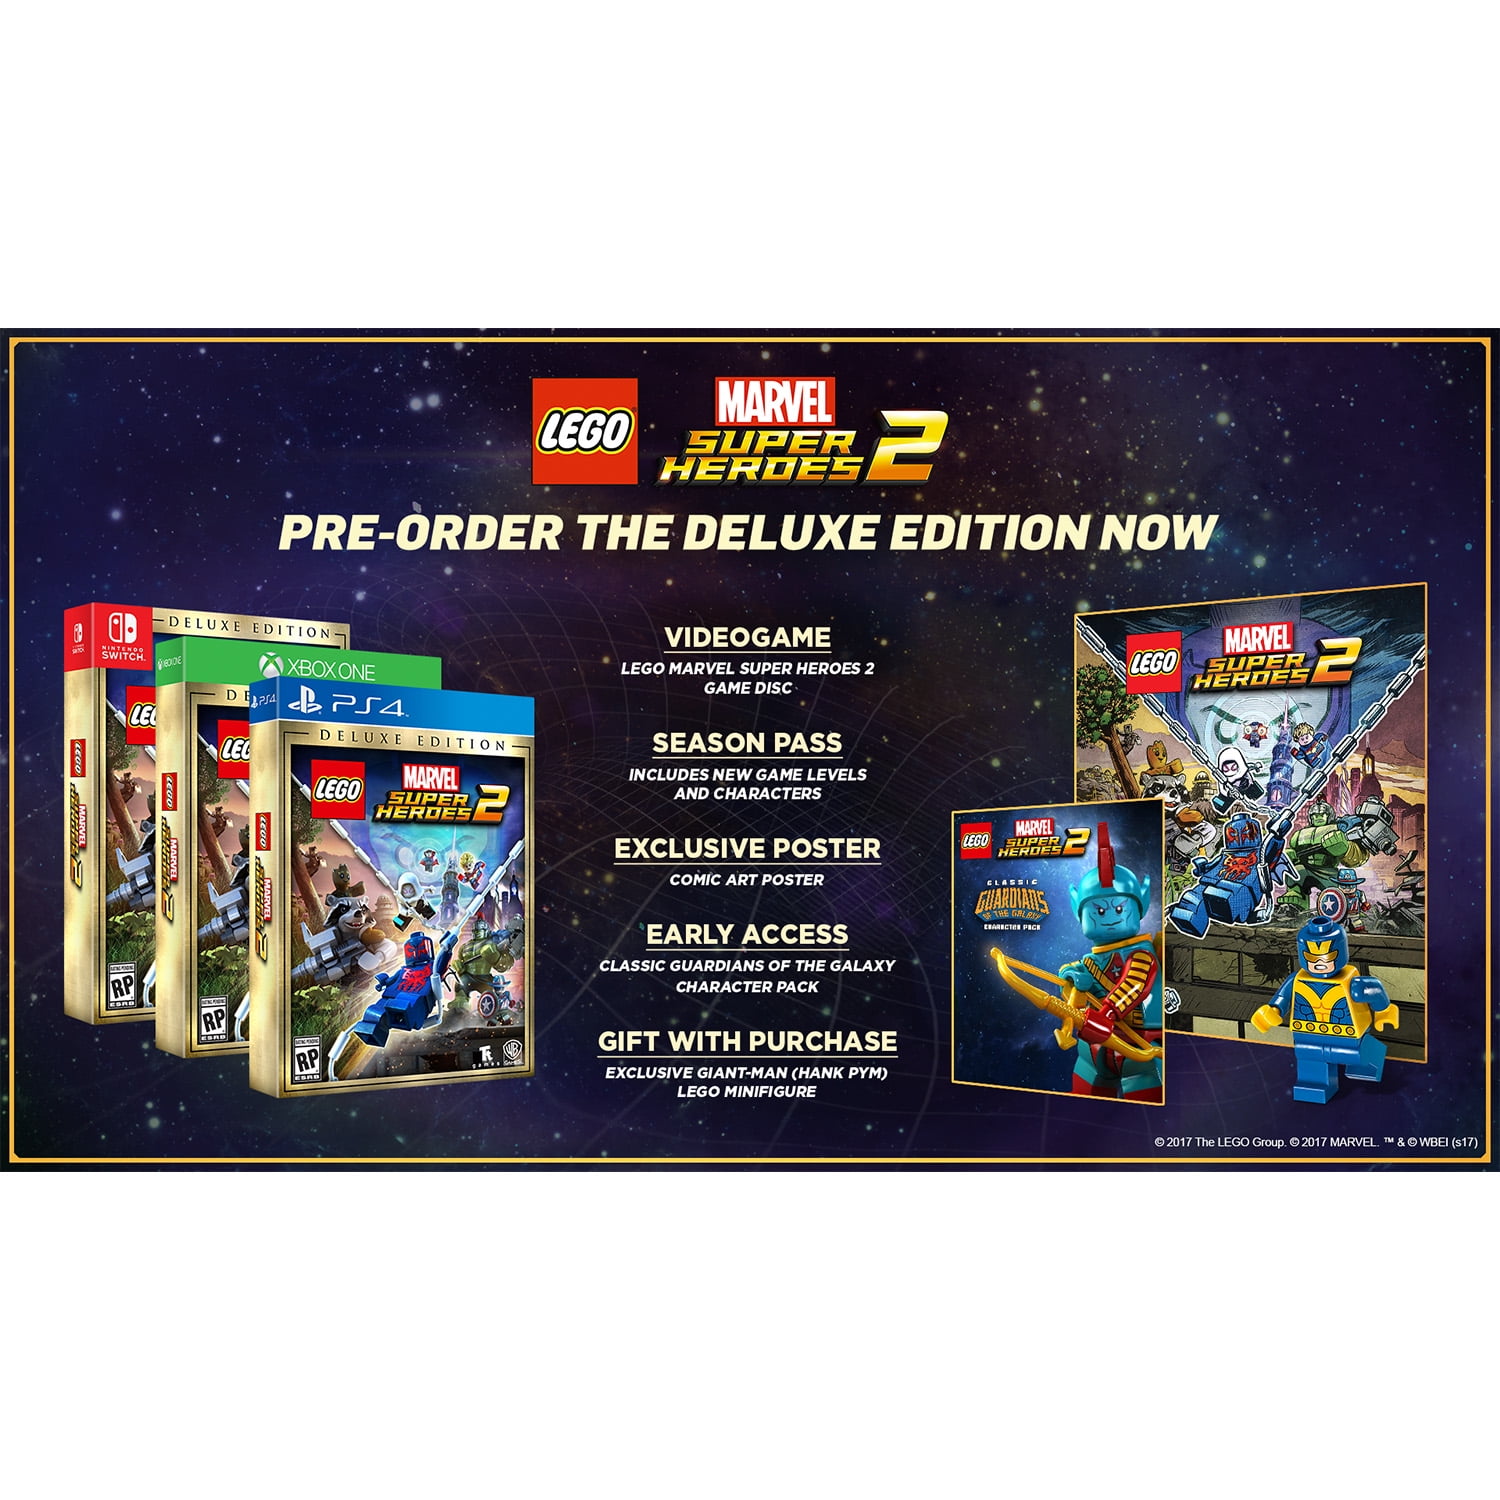 Play World - LEGO Marvel Super Heroes 2 (PC) 2017 Requisitos Minimos: OS:  Windows 7/8/8.1/10 x86 and x64 Processor: Intel Core i3-3240 (2 * 3400) or  equivalent, AMD Athlon X4 740 (2 *